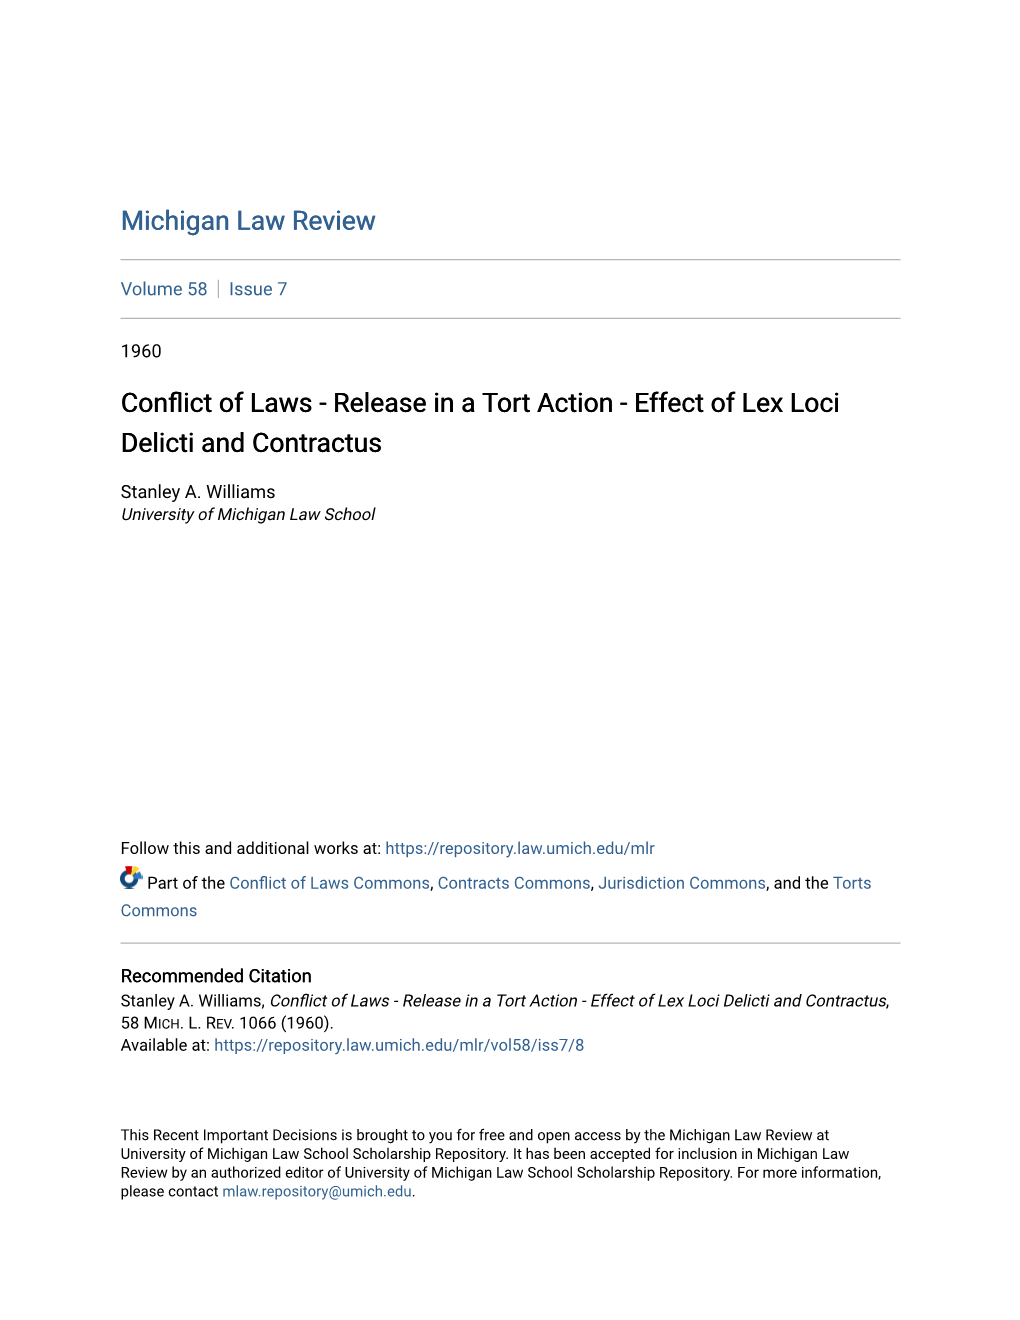 Conflict of Laws - Release in a Ort T Action - Effect of Lex Loci Delicti and Contractus